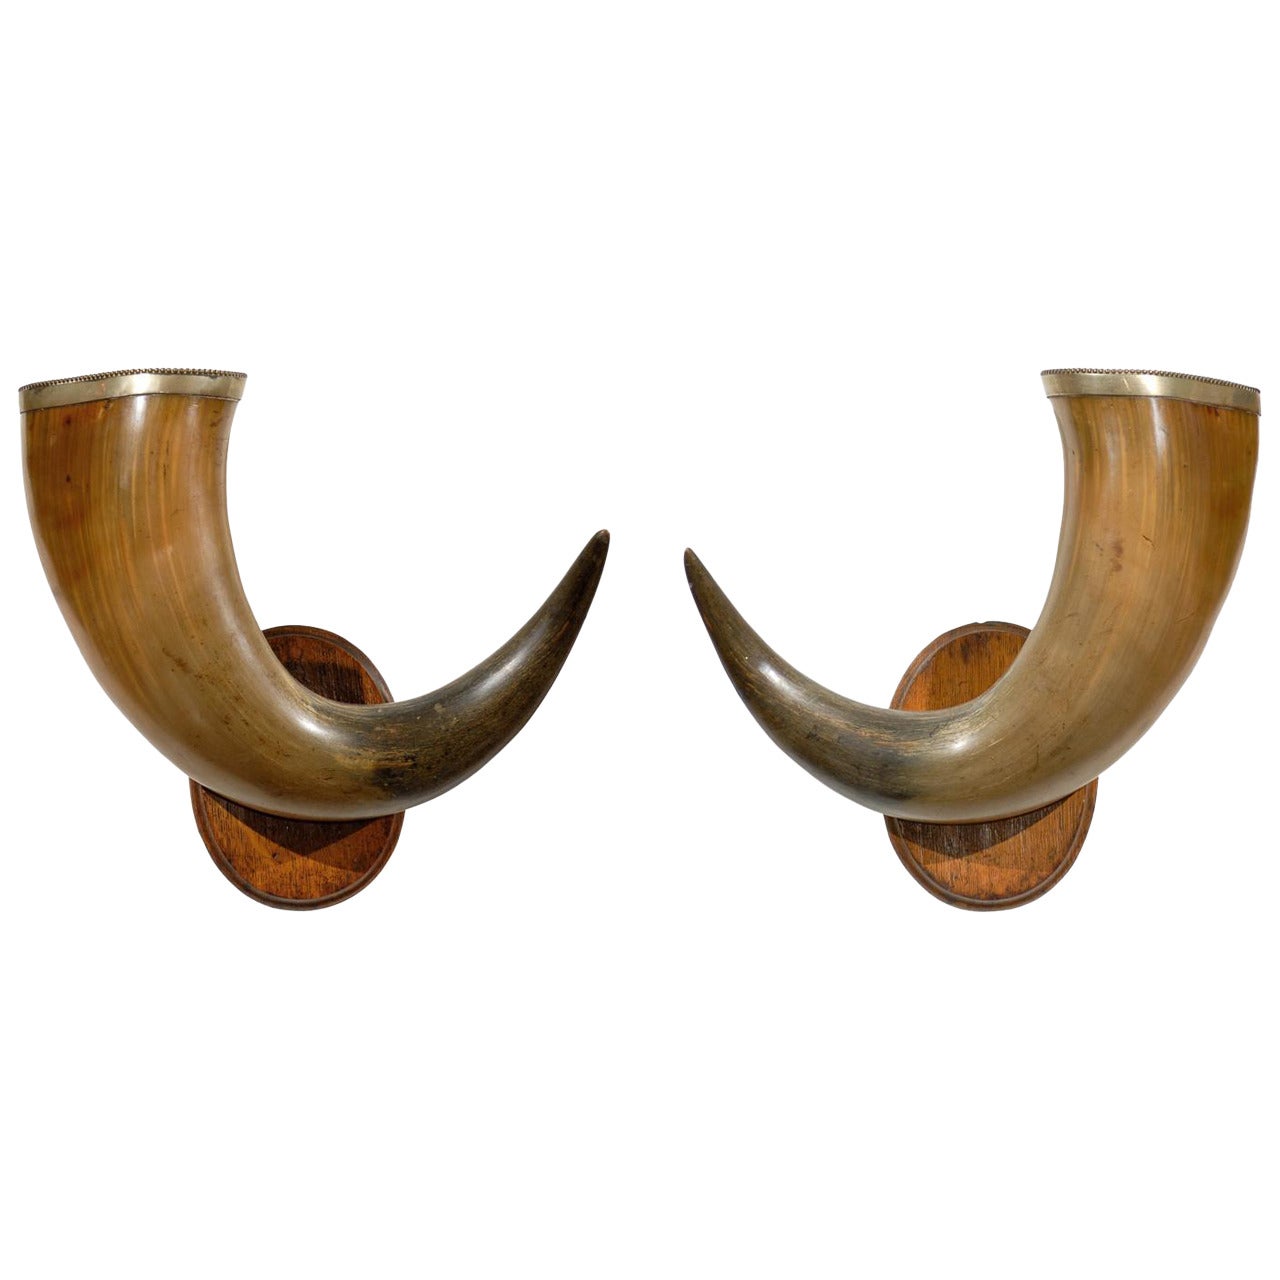 Pair of English Late 19th Century Horns with Silver Rim, Mounted on Wooden Plate For Sale